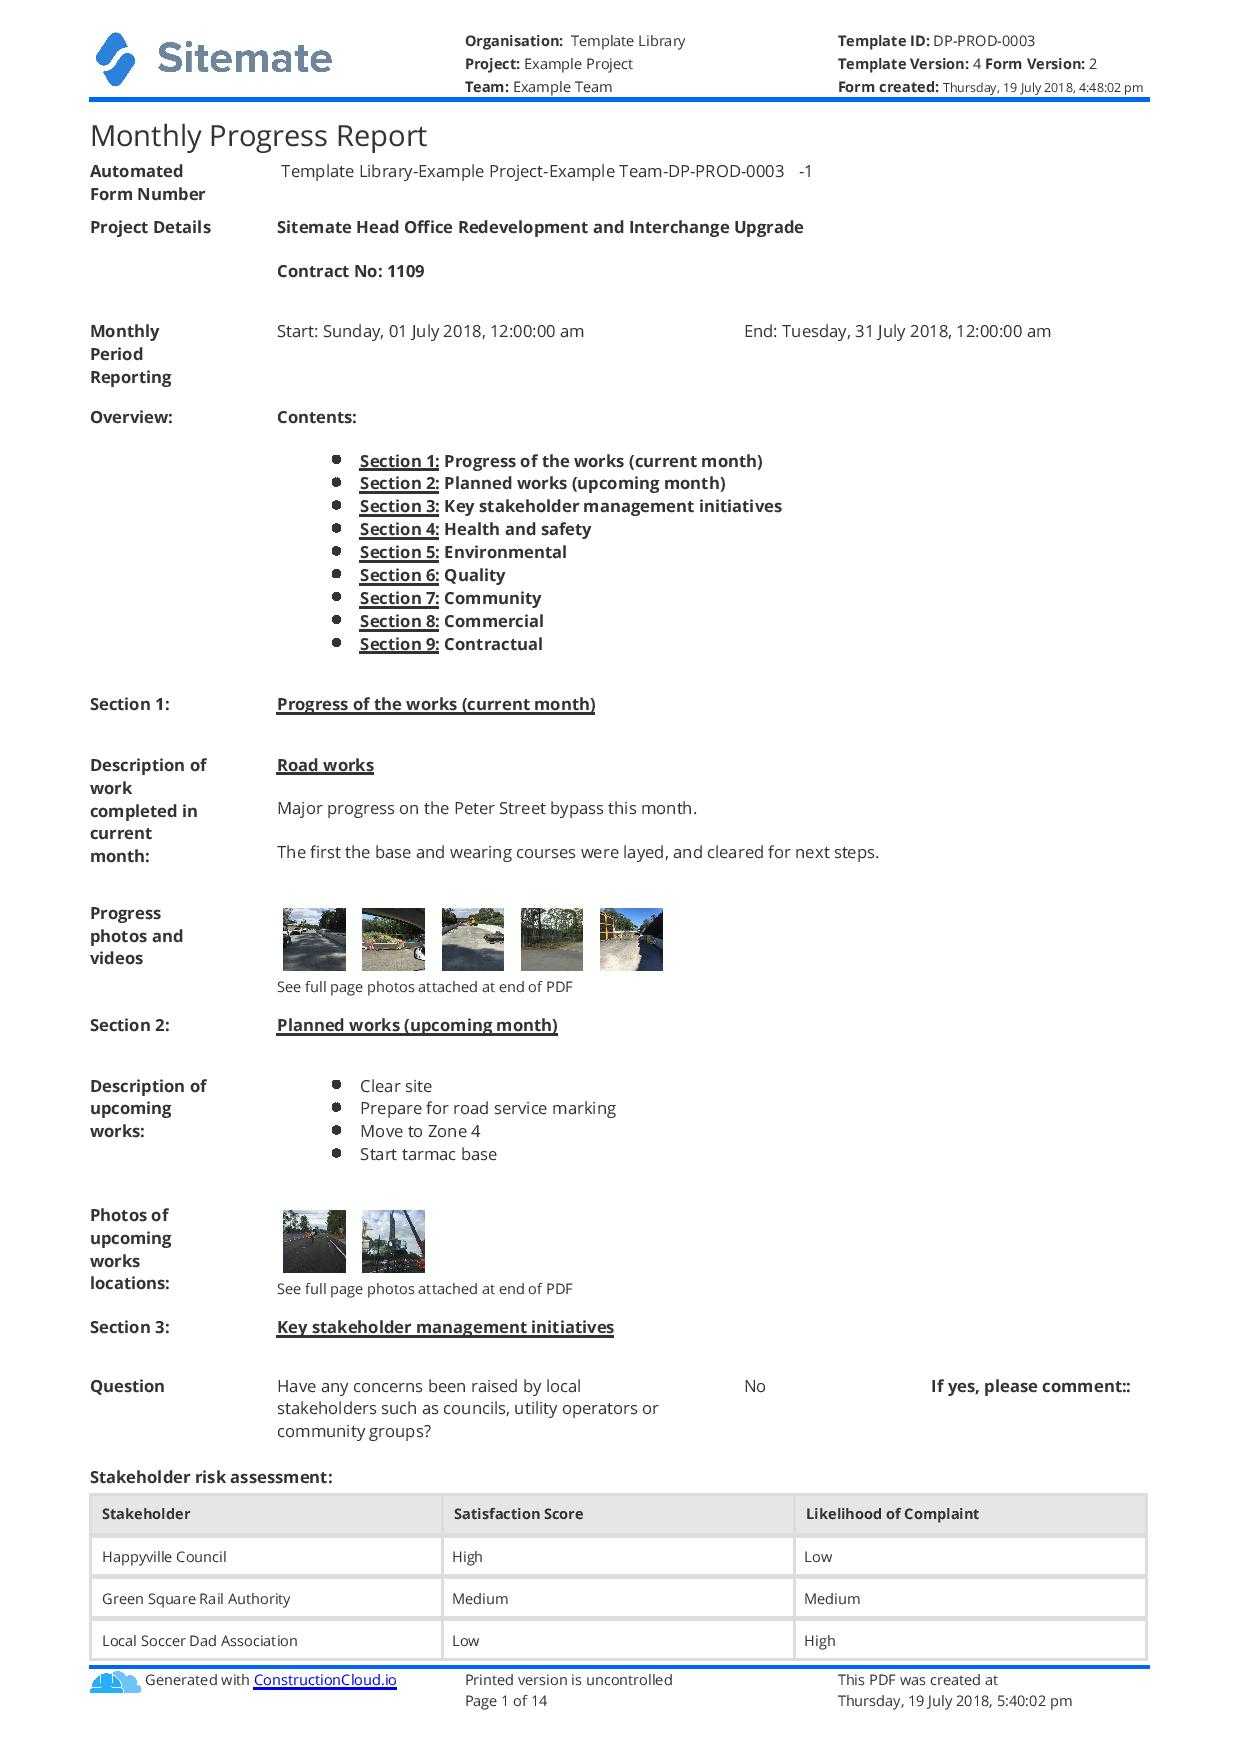 Monthly Construction Progress Report Template: Use This Intended For Progress Report Template For Construction Project